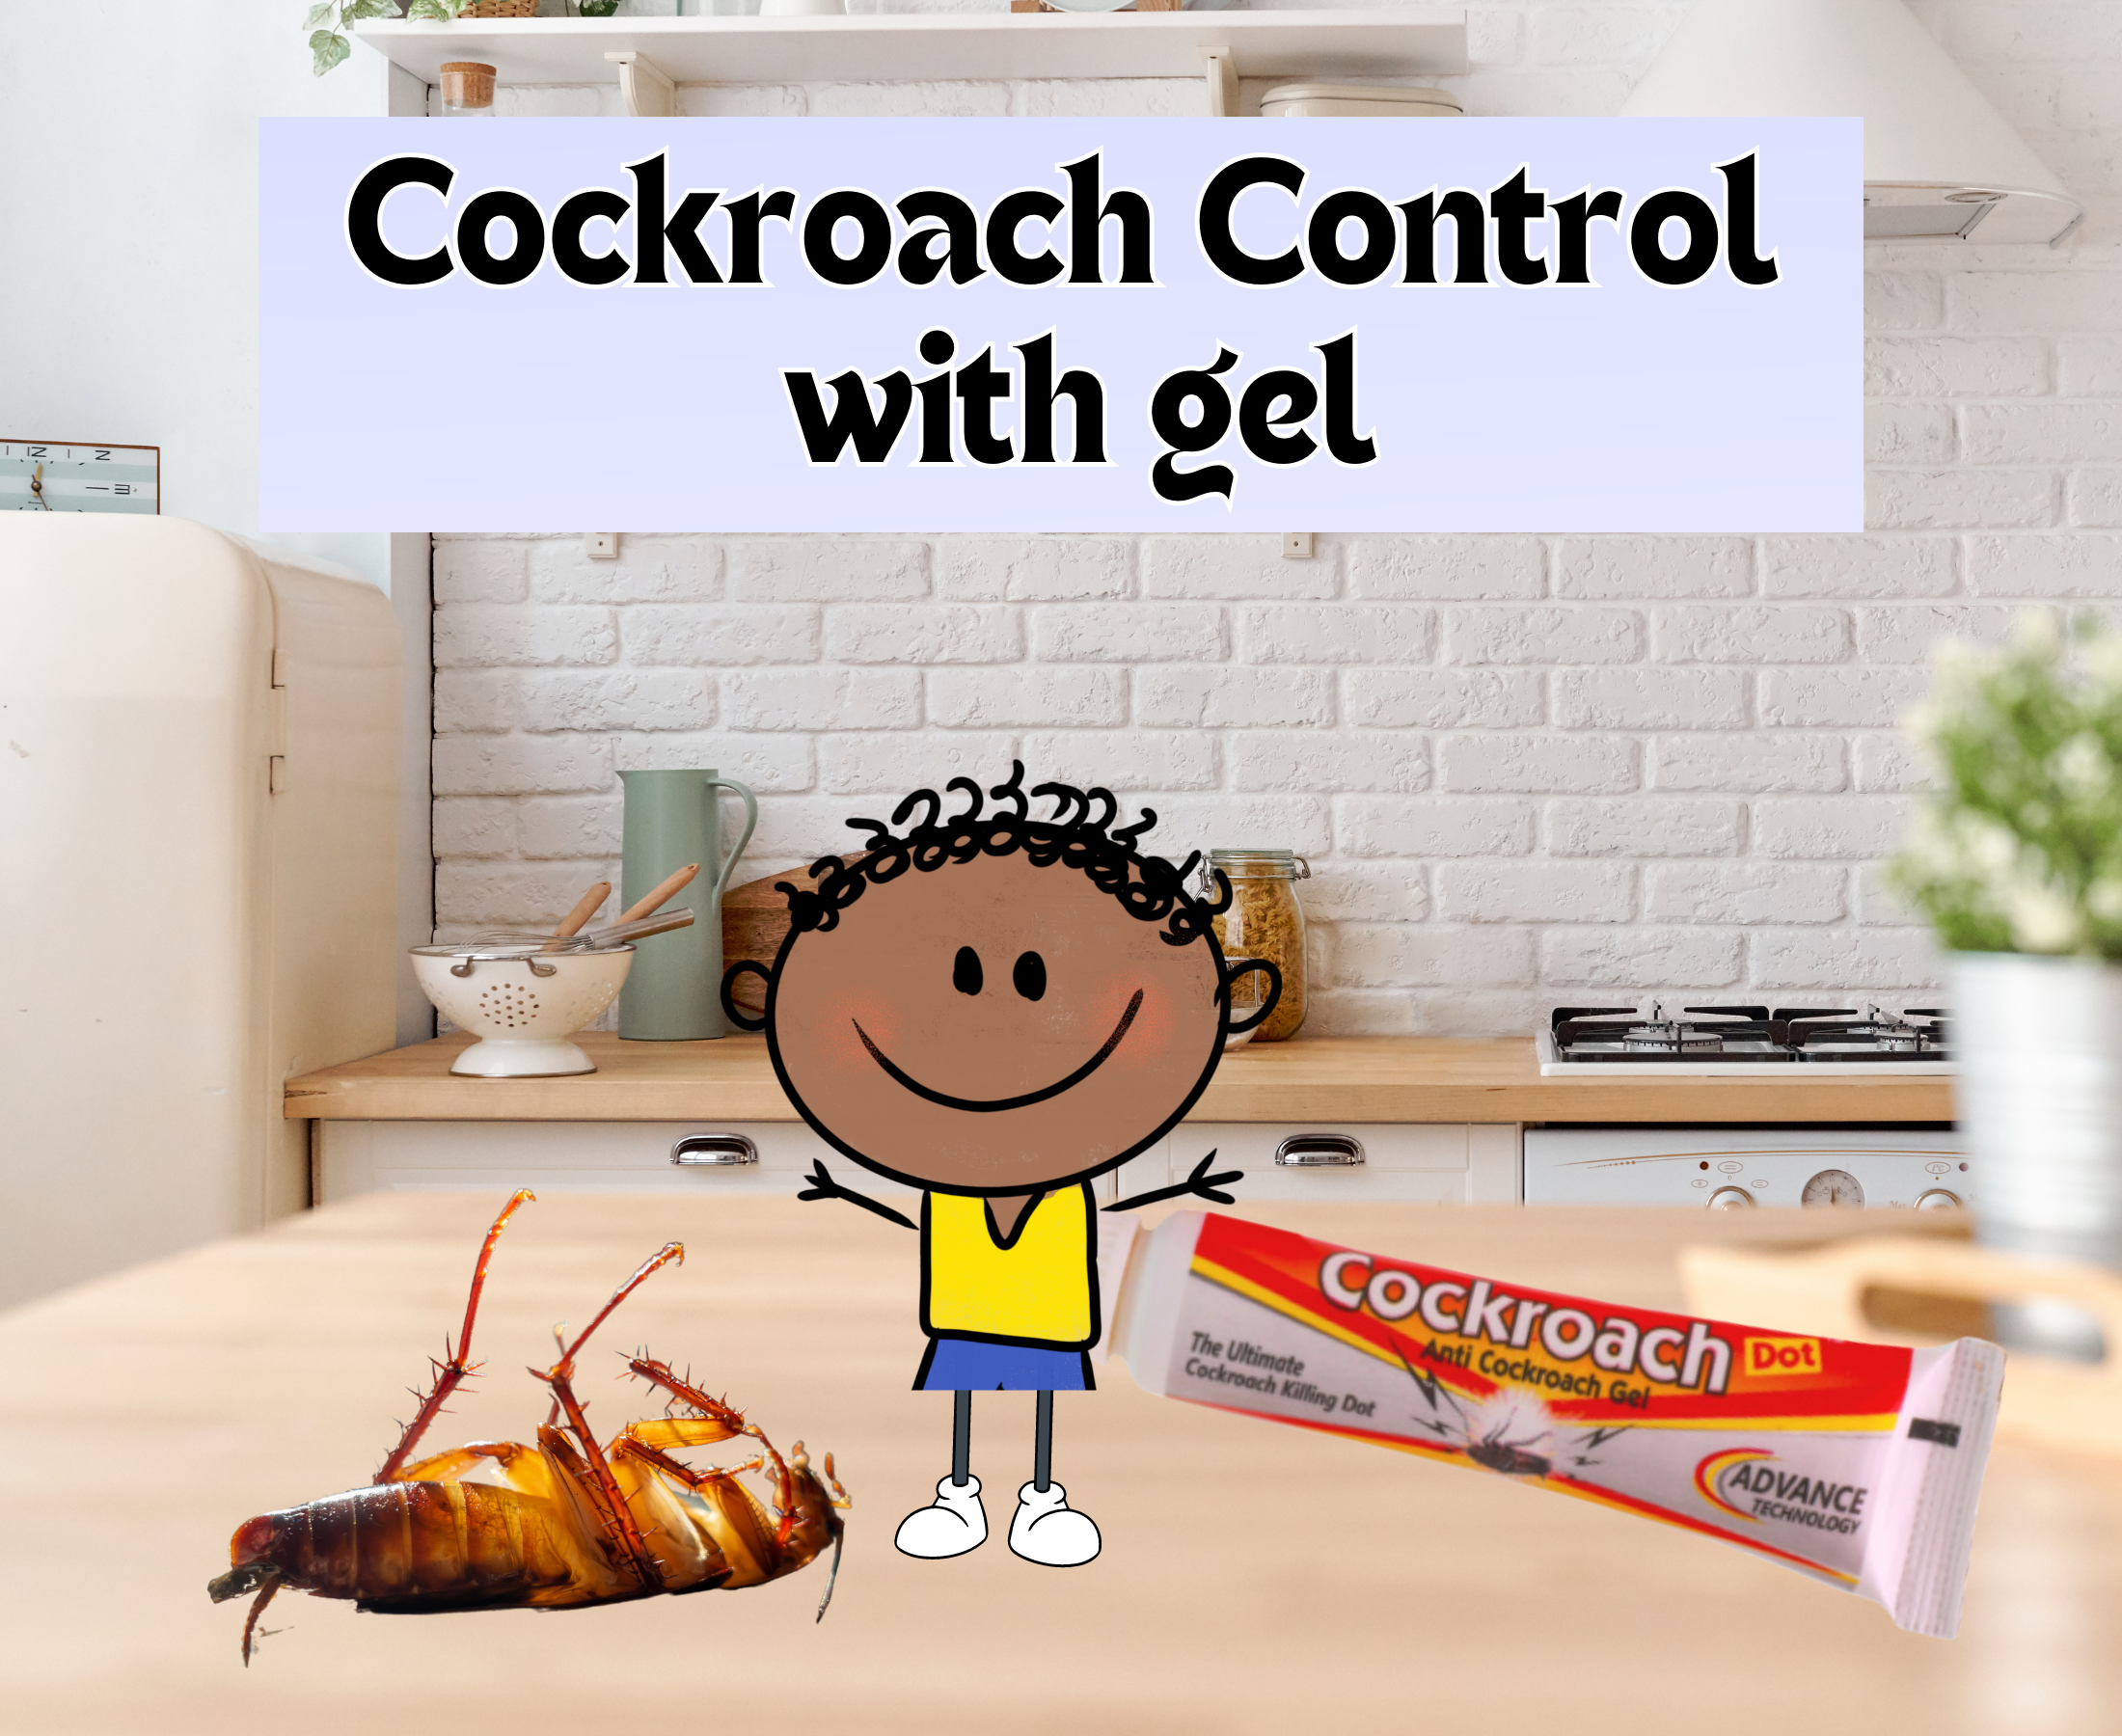 Can cockroach killer paste terminate roaches permanently?